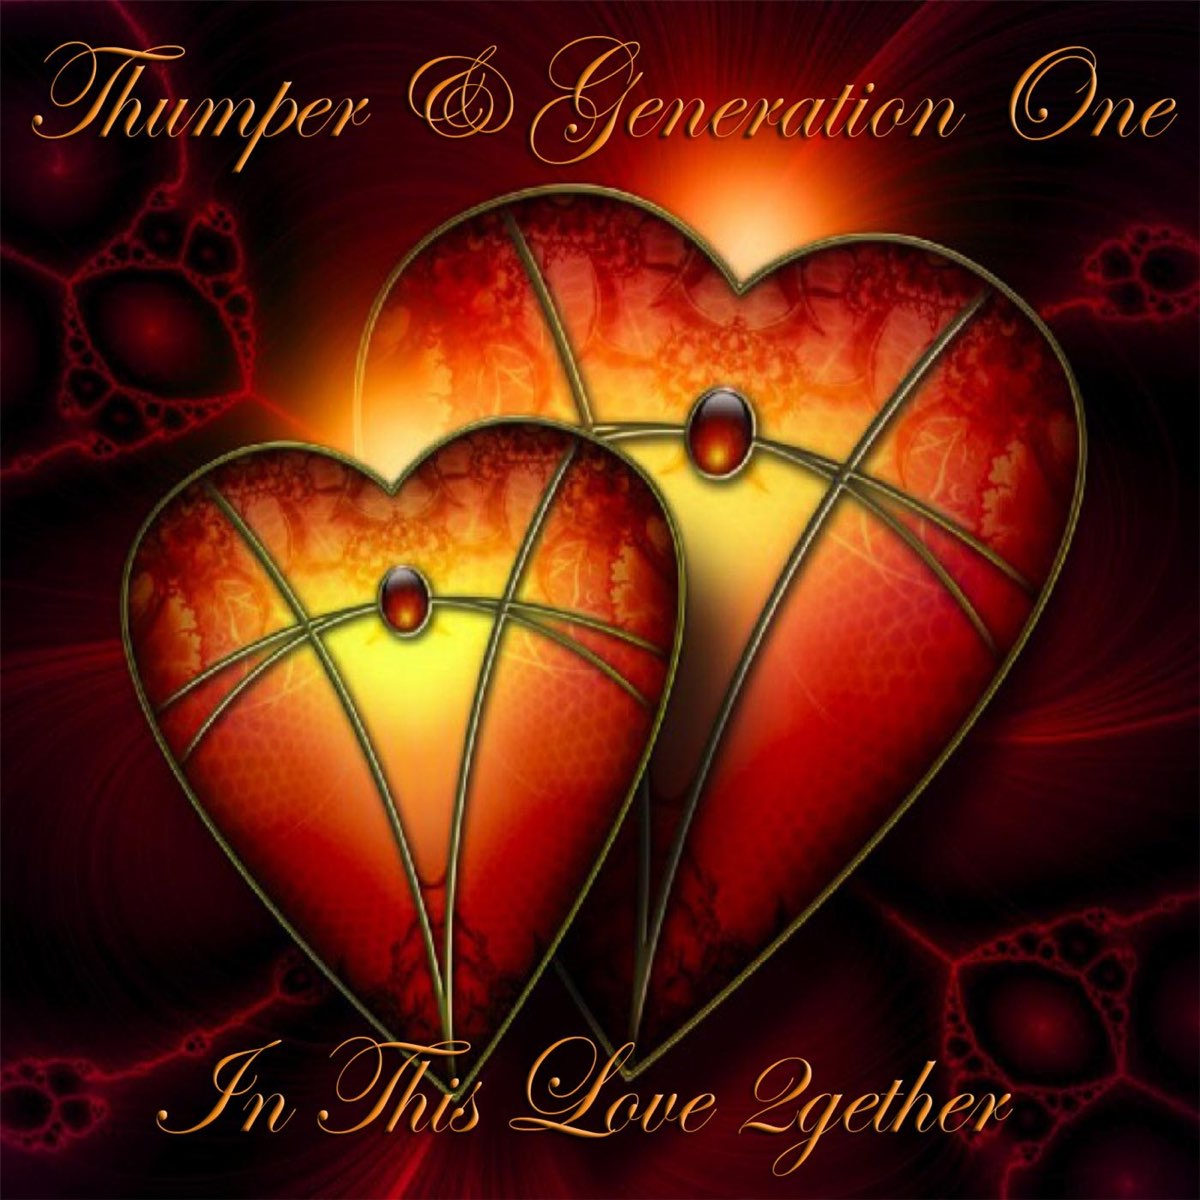 In This Love 2gether - Single by Thumper & Generation One on Apple Music